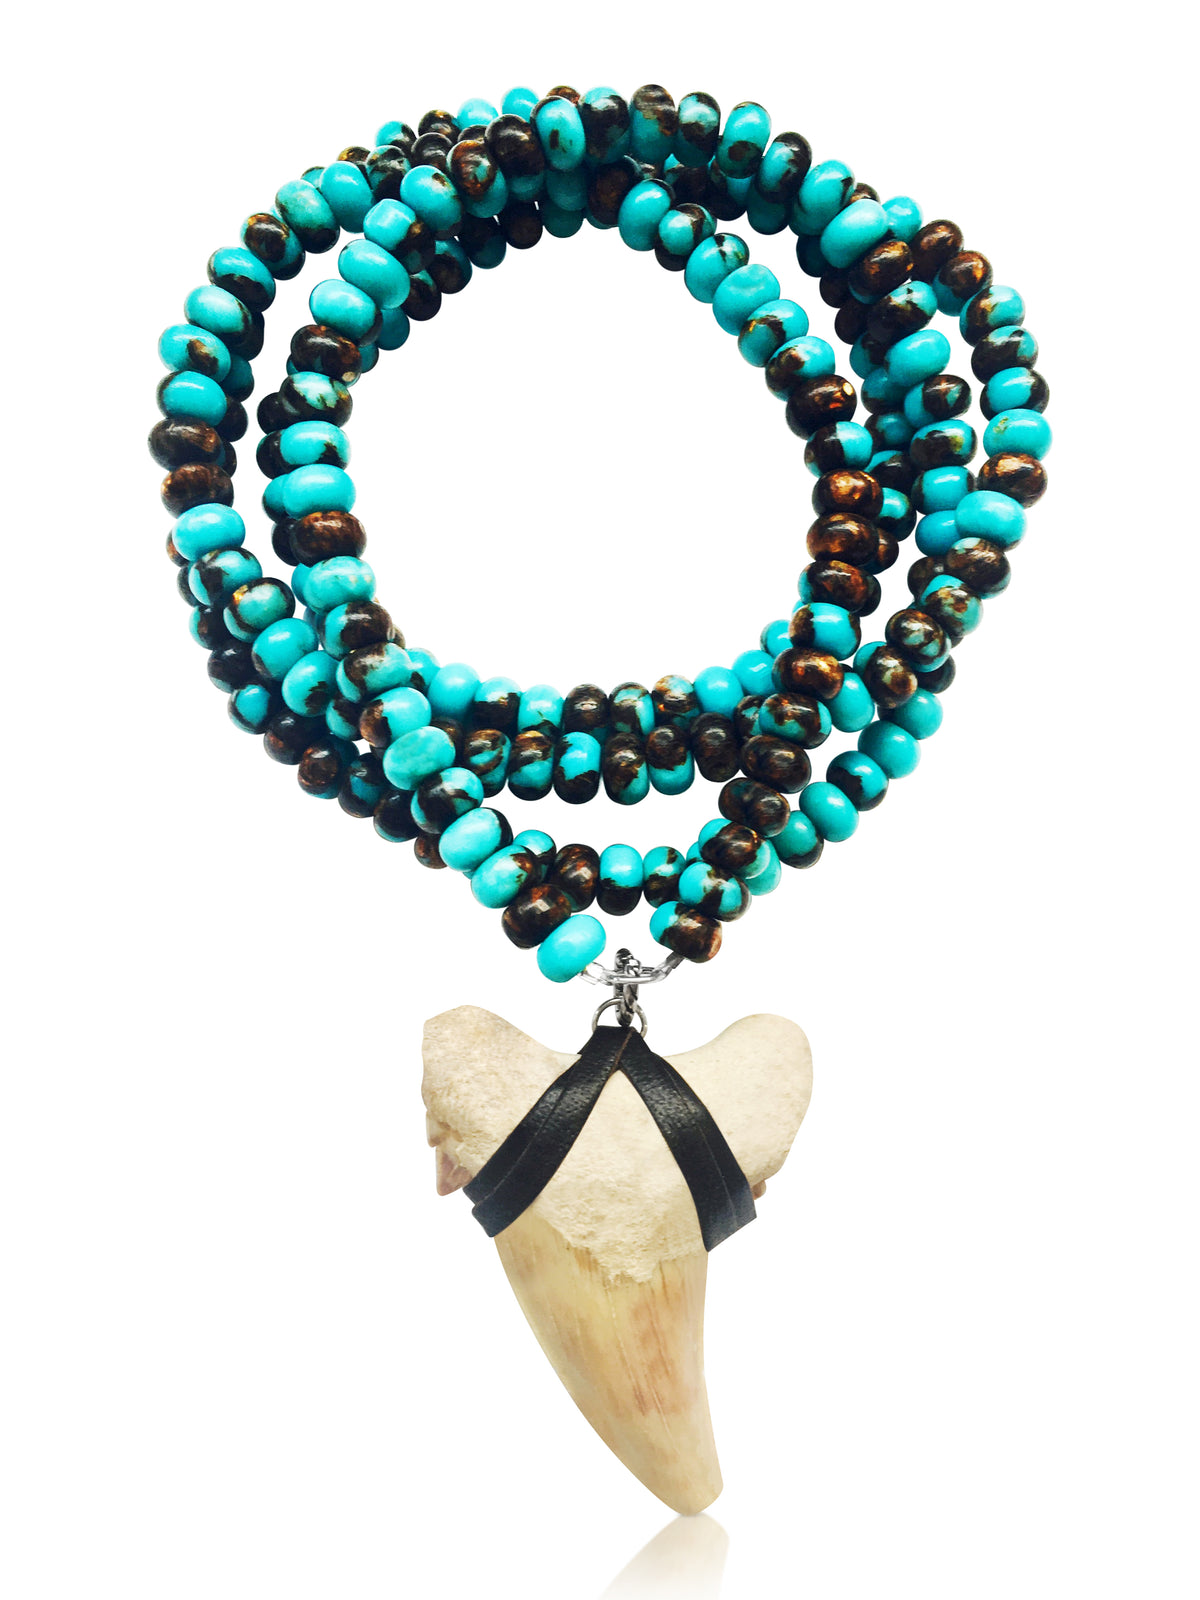 Shark Tooth Necklace for the Adrenaline Hunters and Shark Lovers - Turquoise